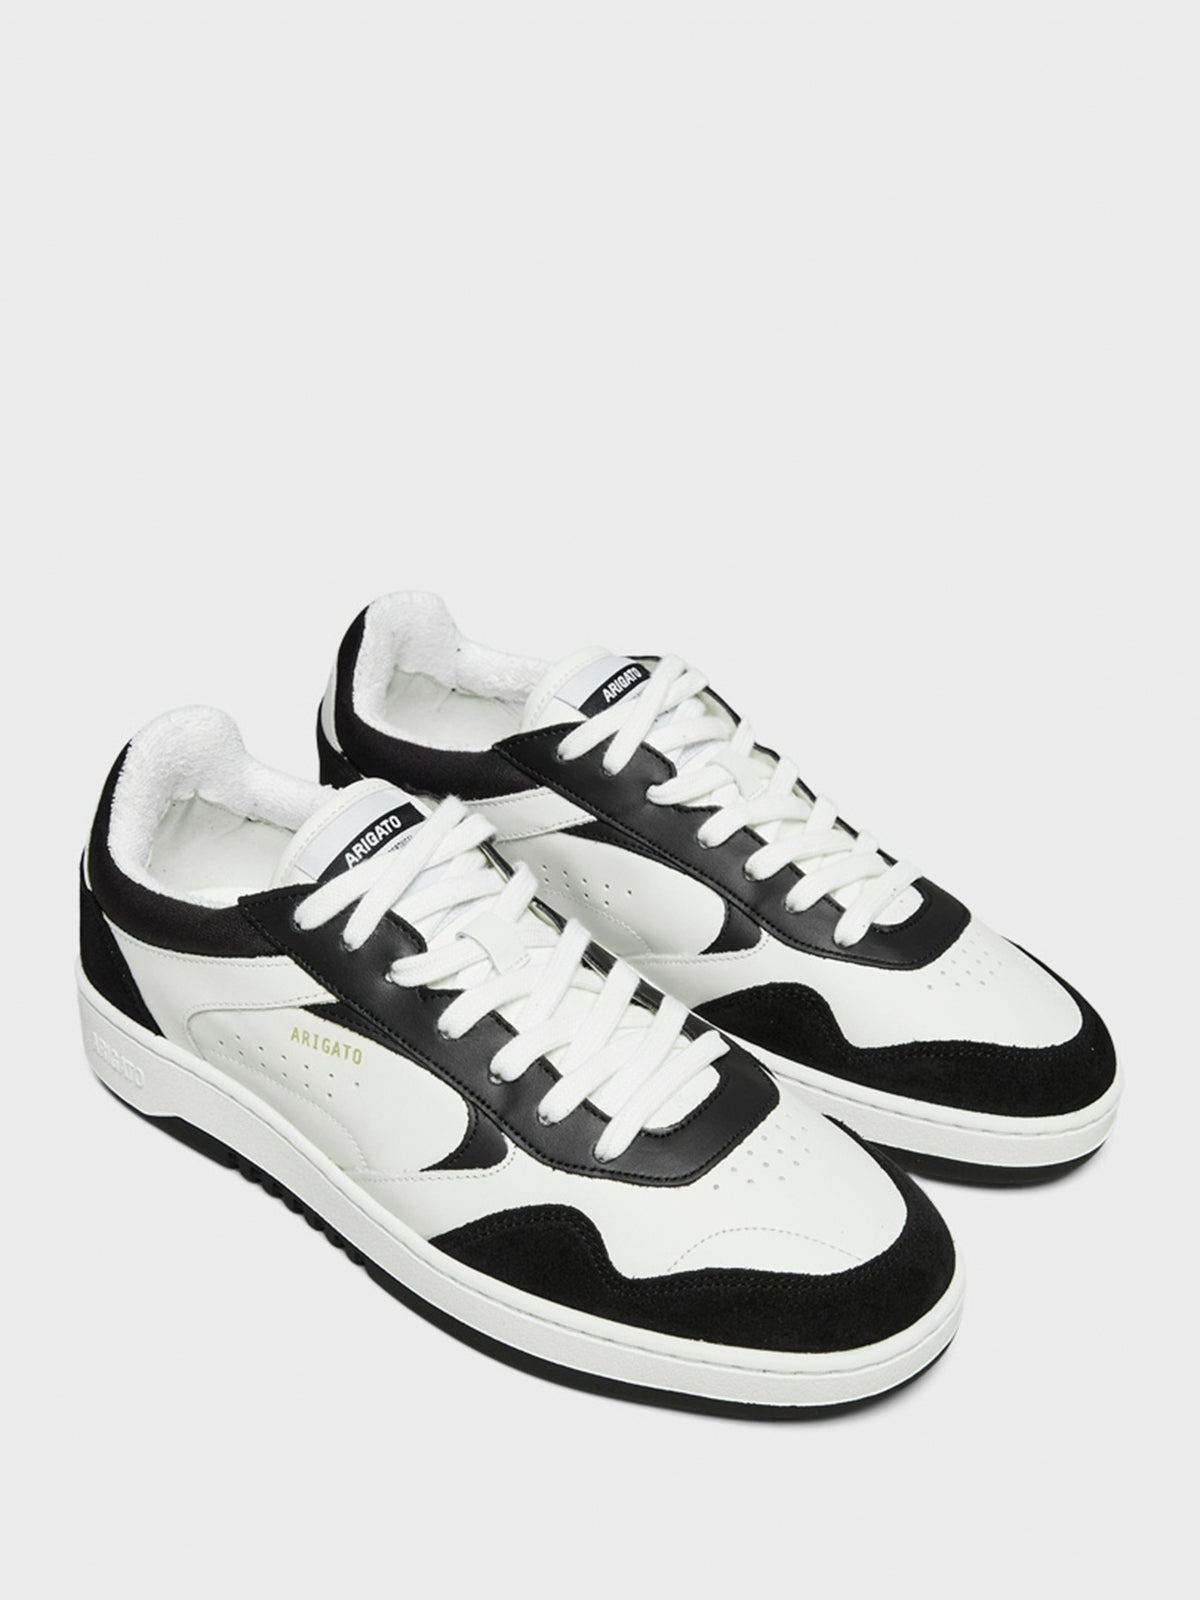 Arlo Sneakers in White and Black